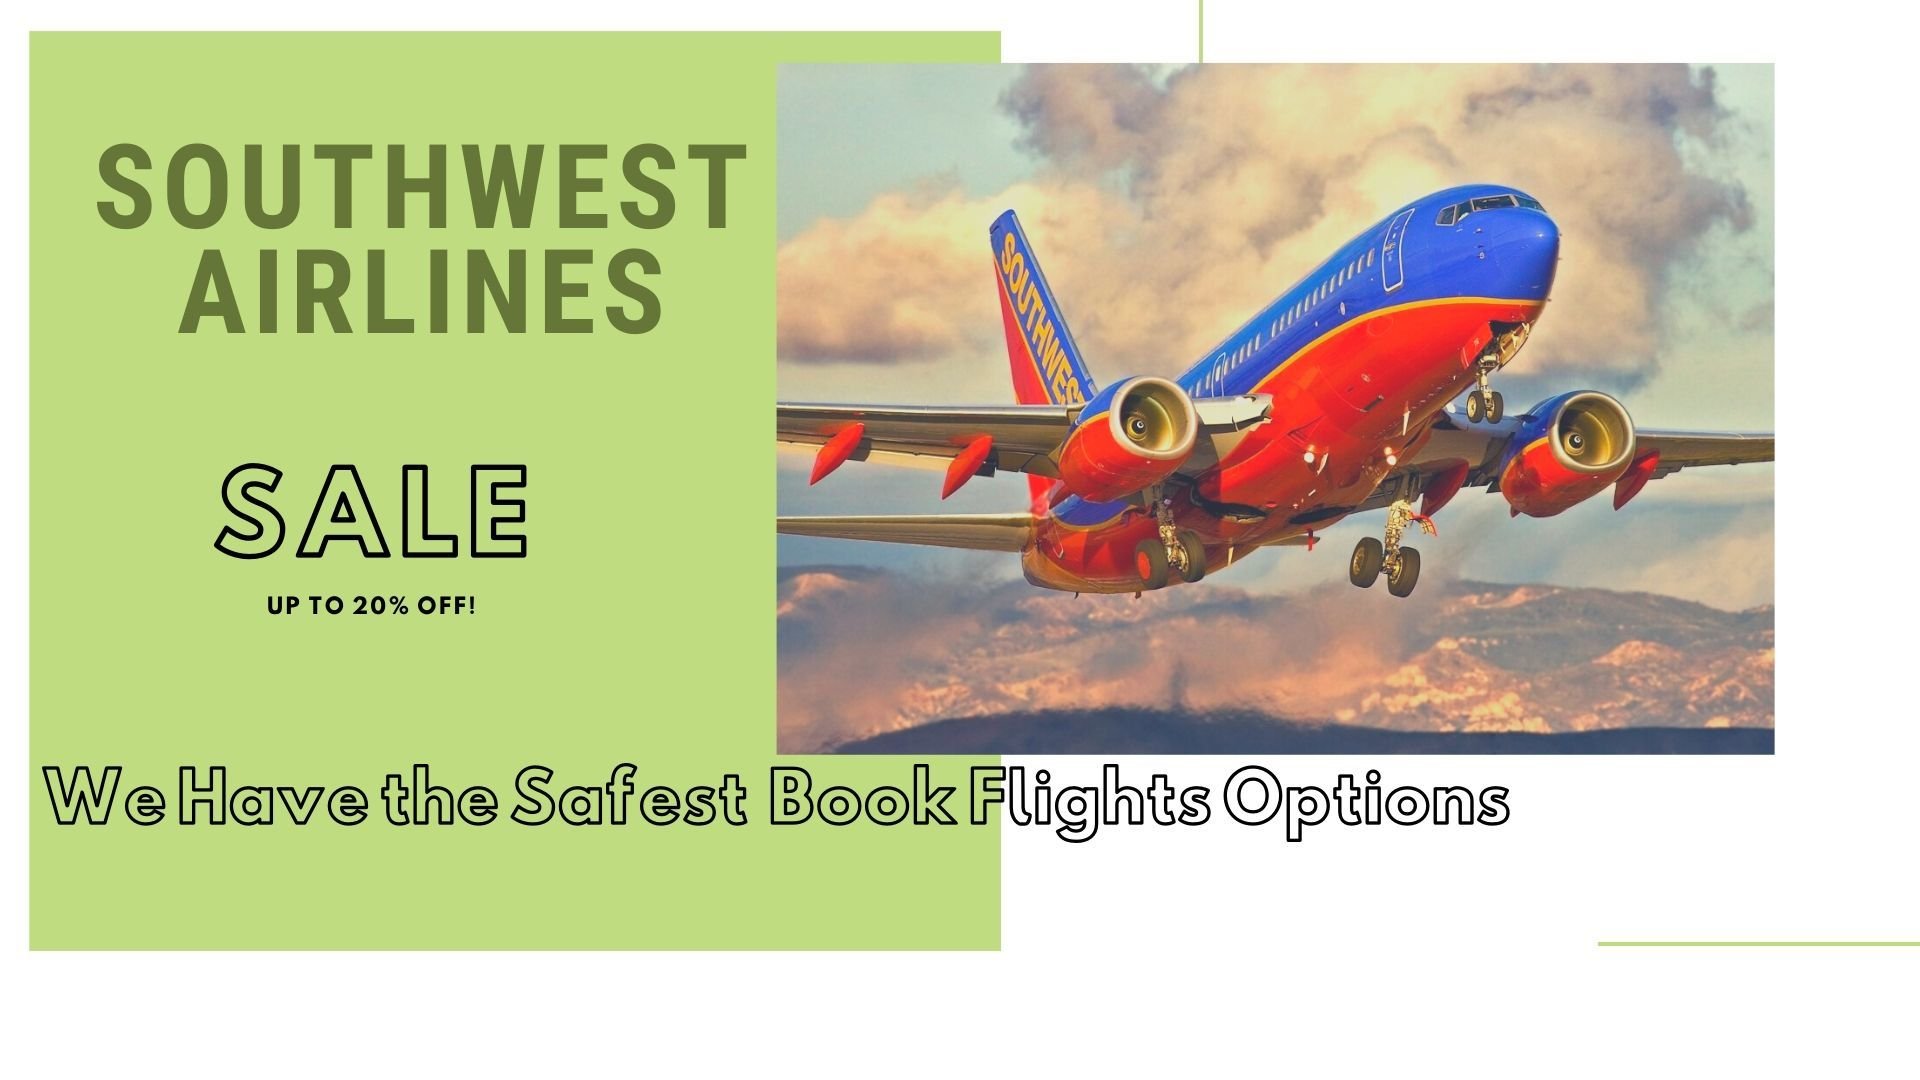 For Best Deals For Southwest Airlines Book A Flight, Call Us!